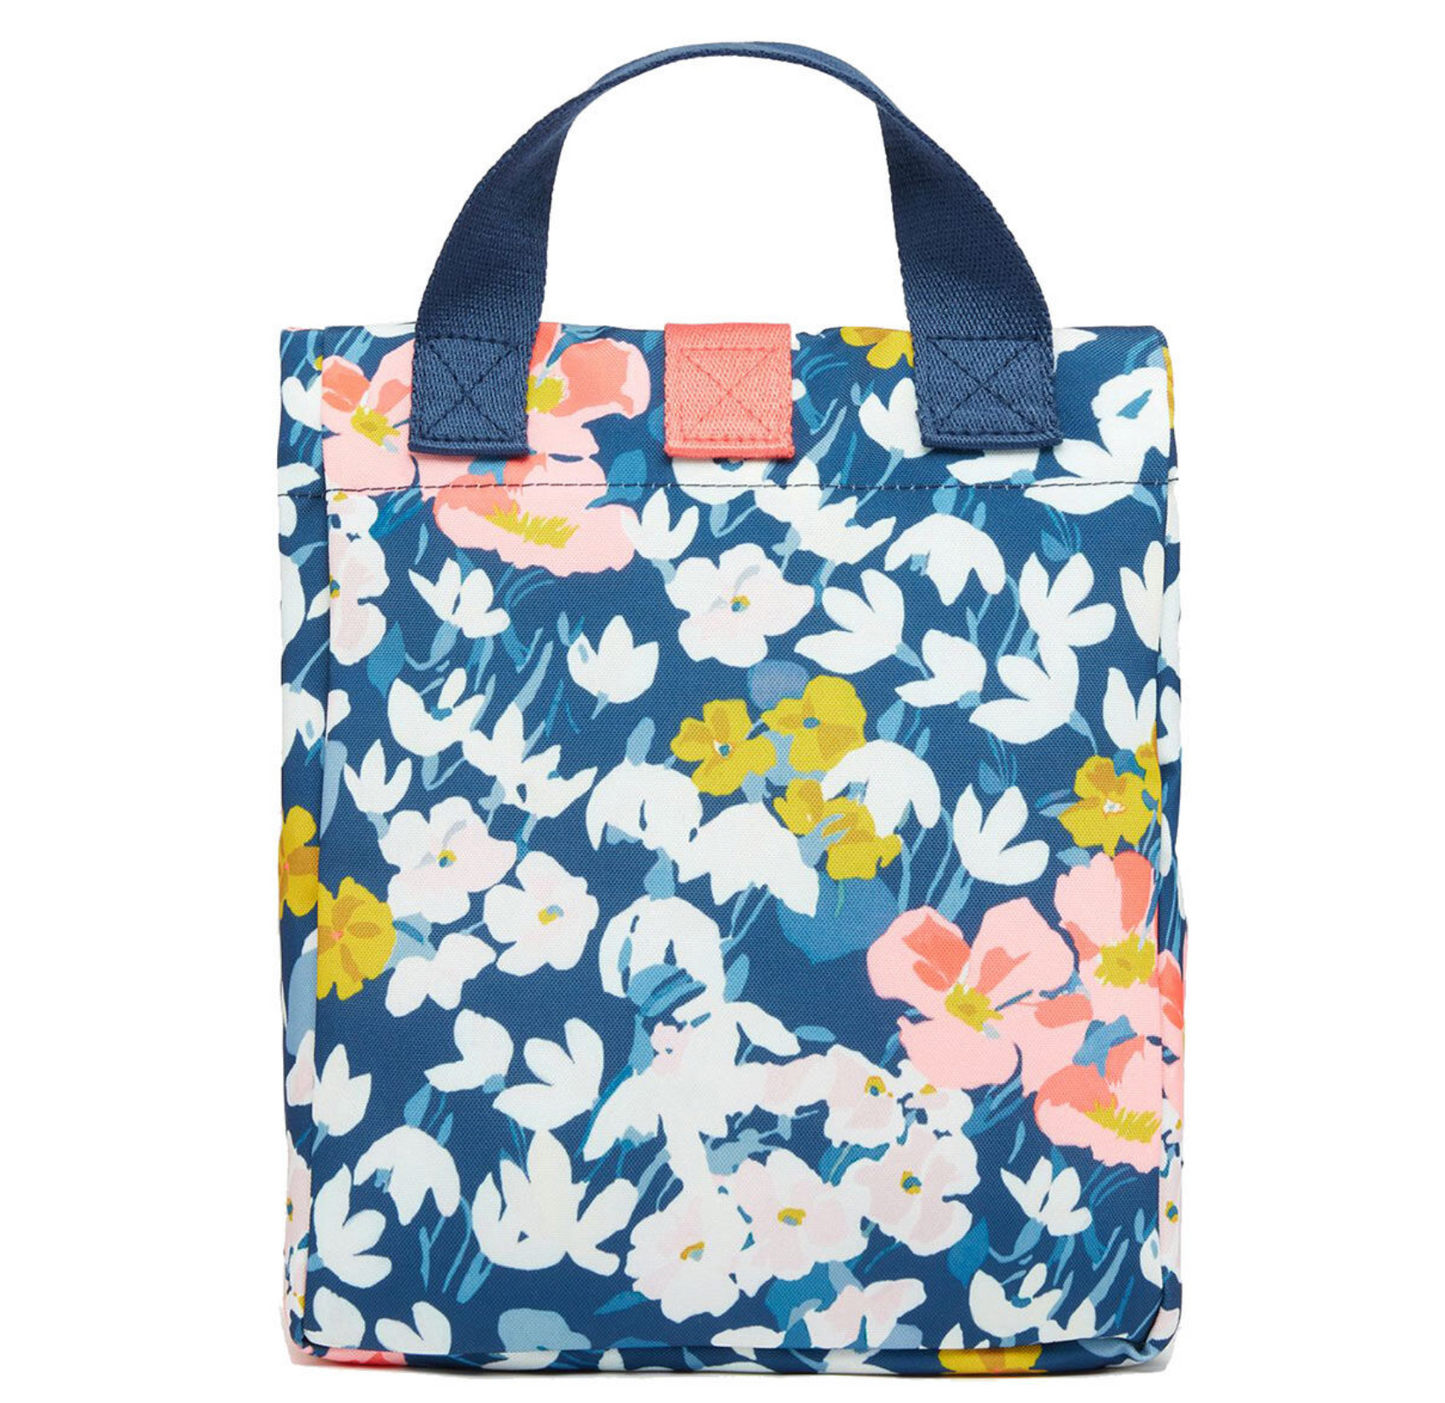 Joules Roll Top Lunch Bag, Floral